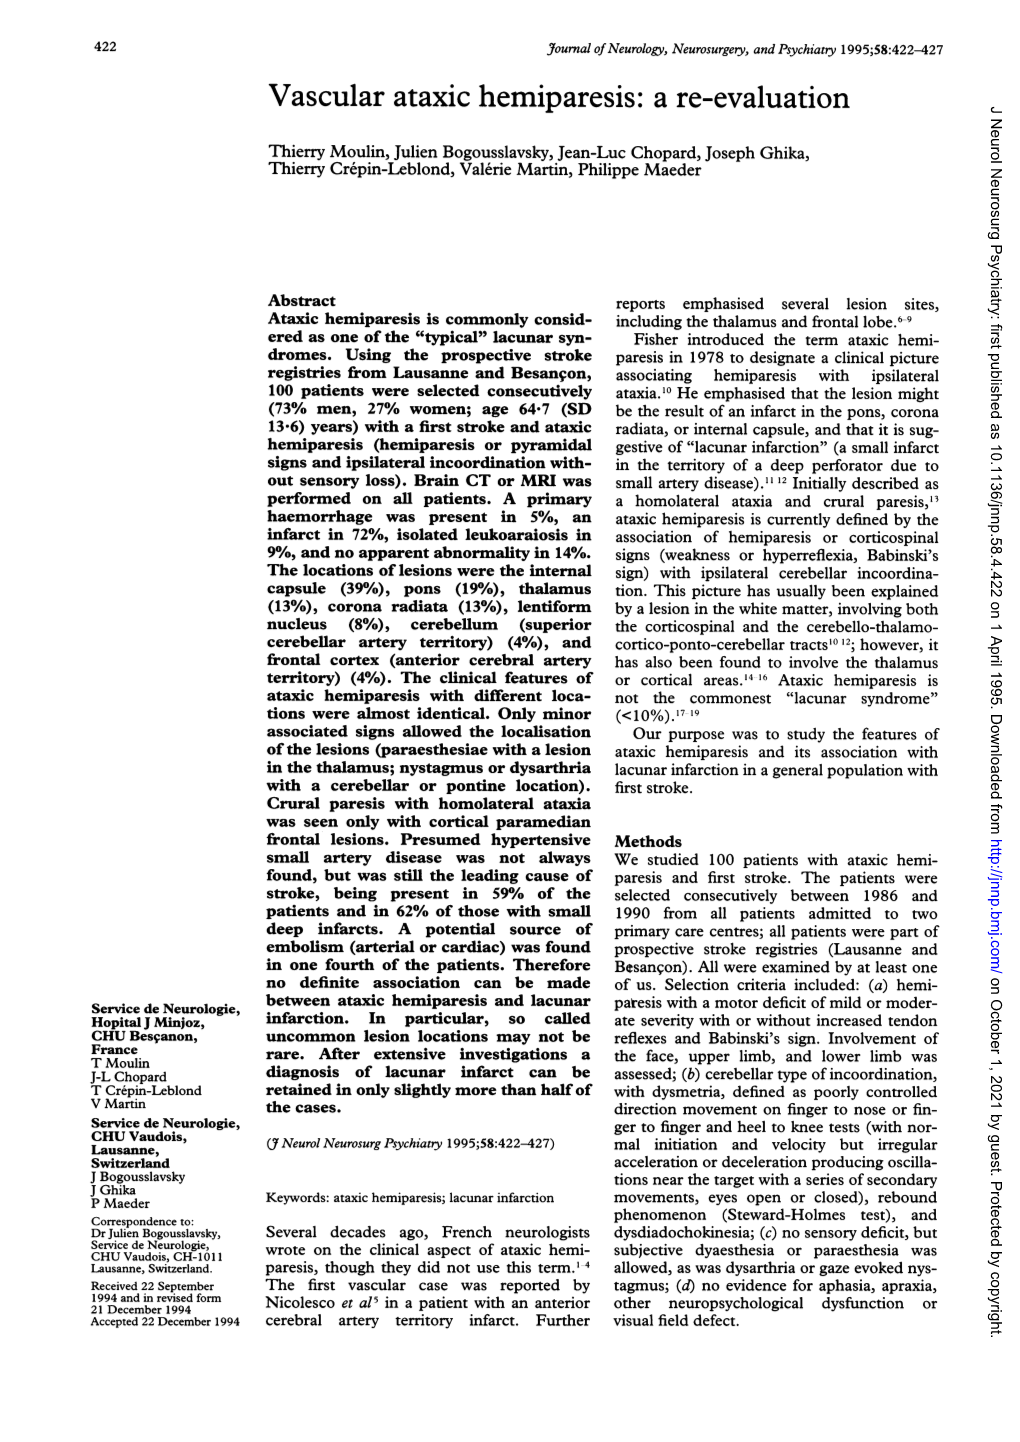 Vascular Ataxic Hemiparesis: a Re-Evaluation J Neurol Neurosurg Psychiatry: First Published As 10.1136/Jnnp.58.4.422 on 1 April 1995